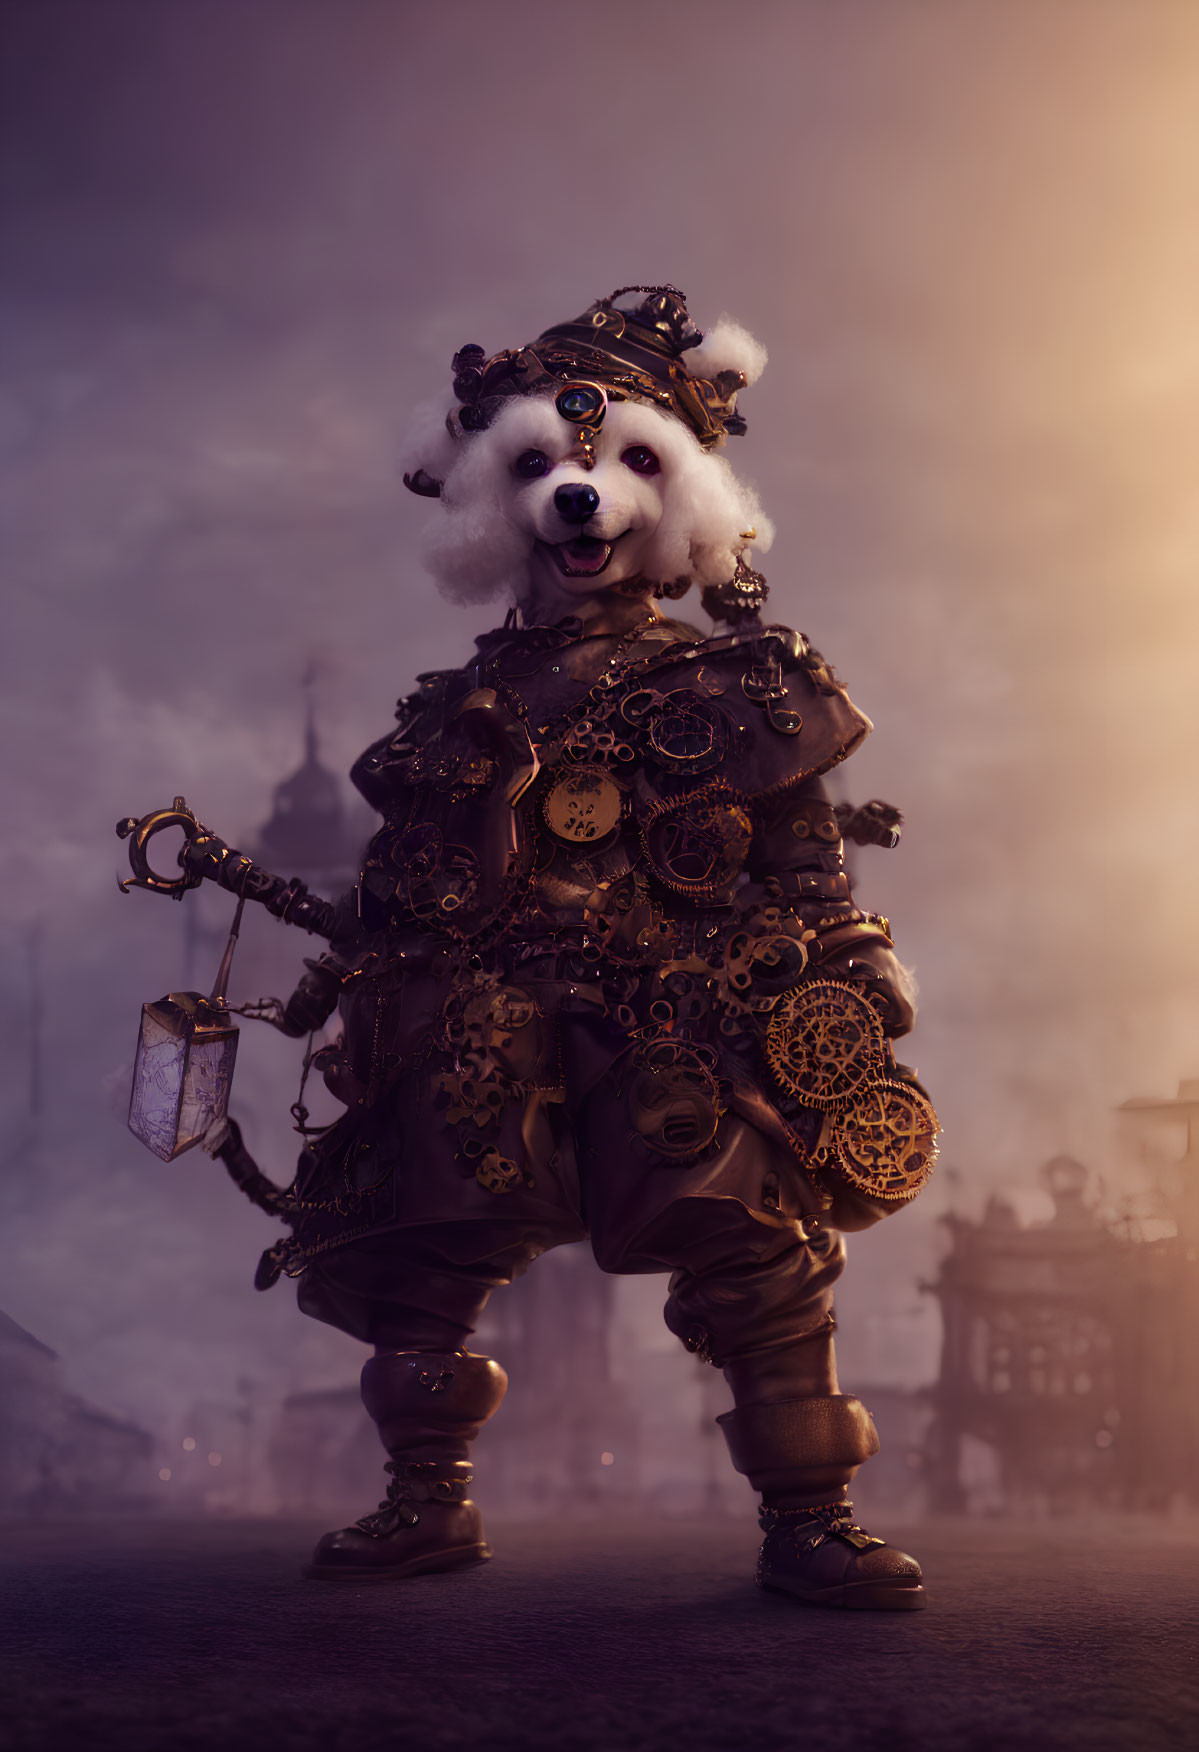 Steampunk-themed character with dog head in industrial setting